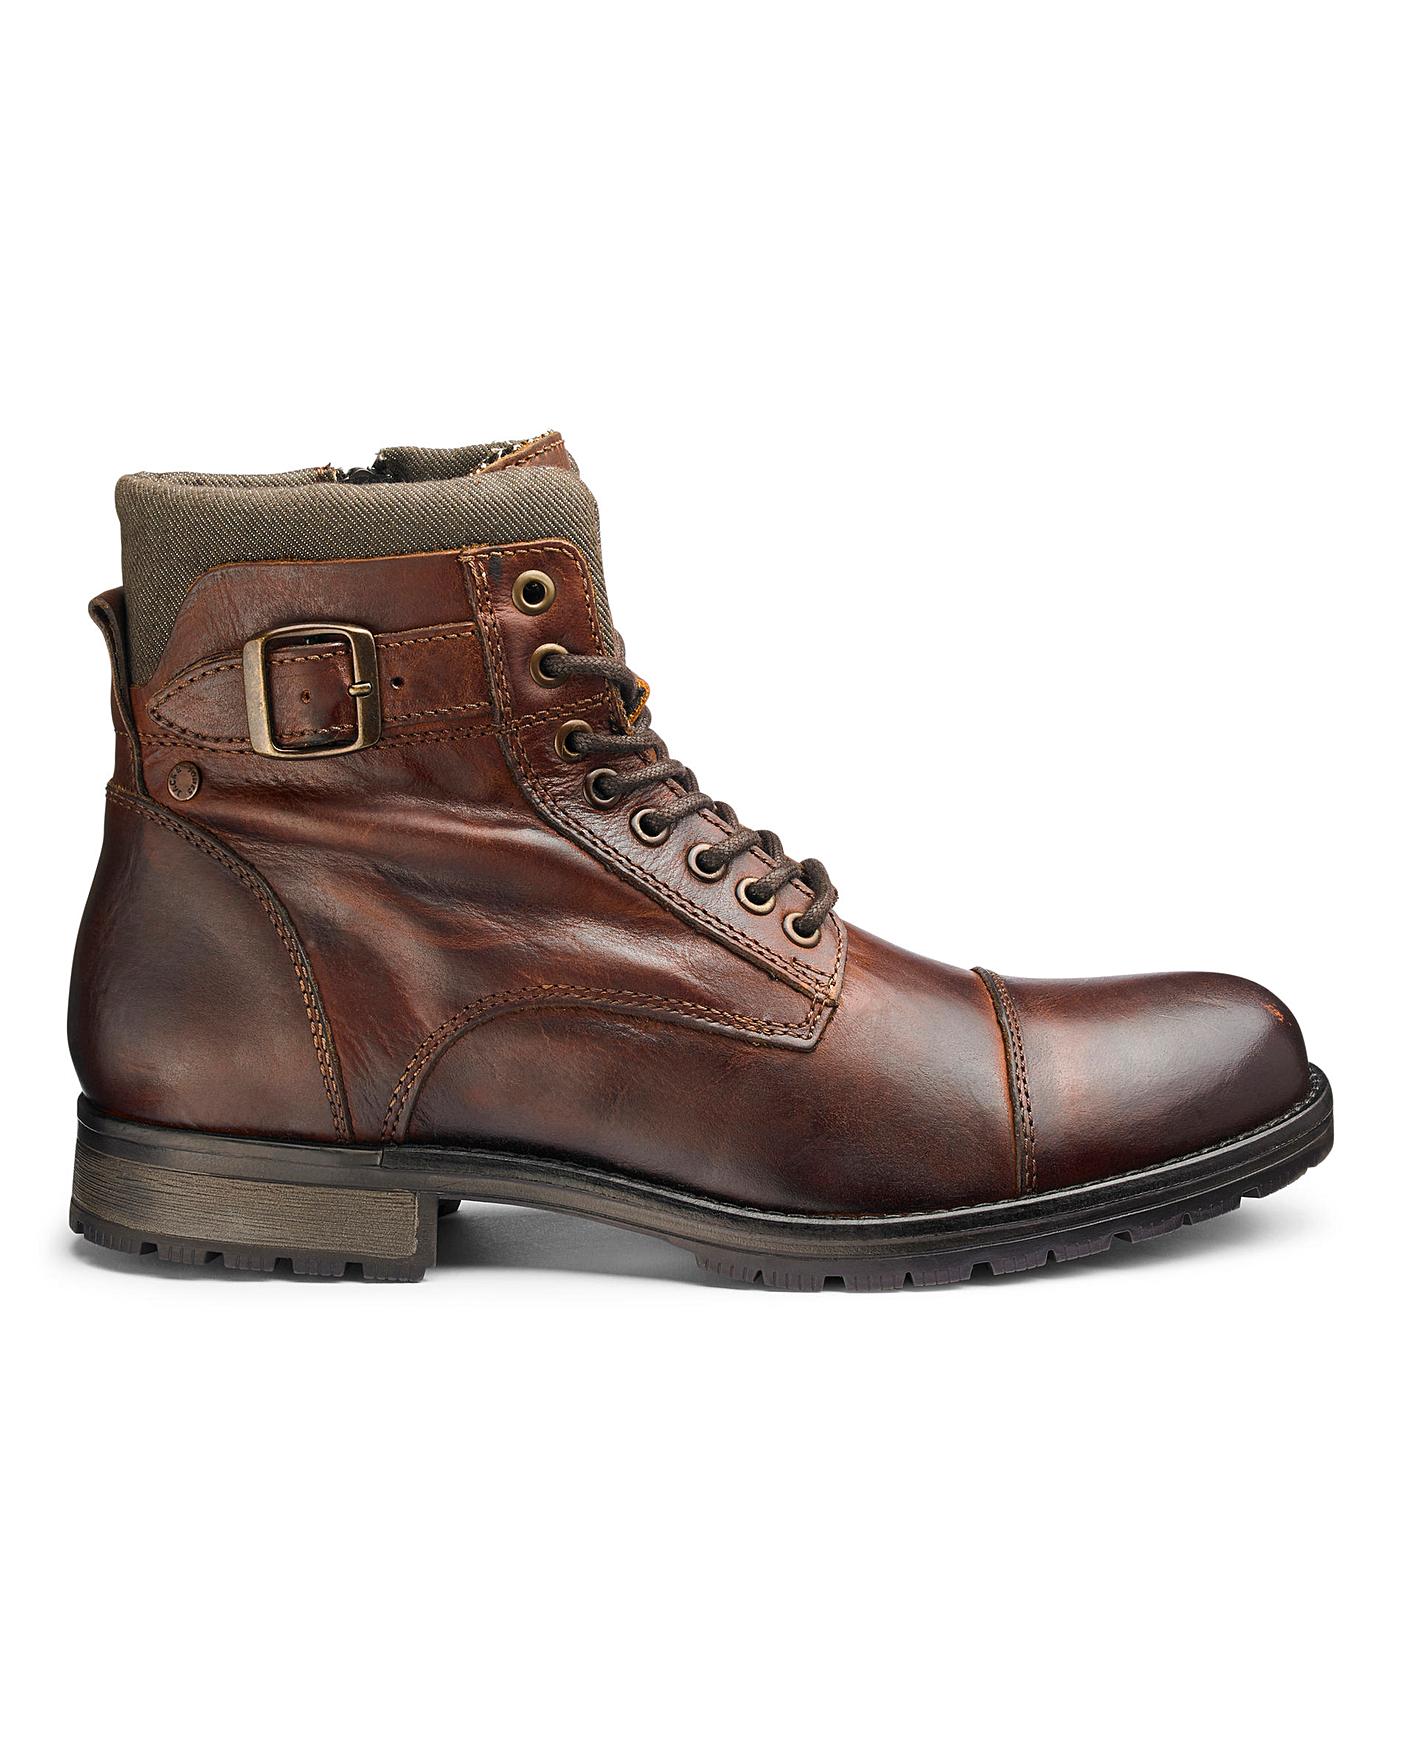 Jack and Jones Albany Boots | Oxendales